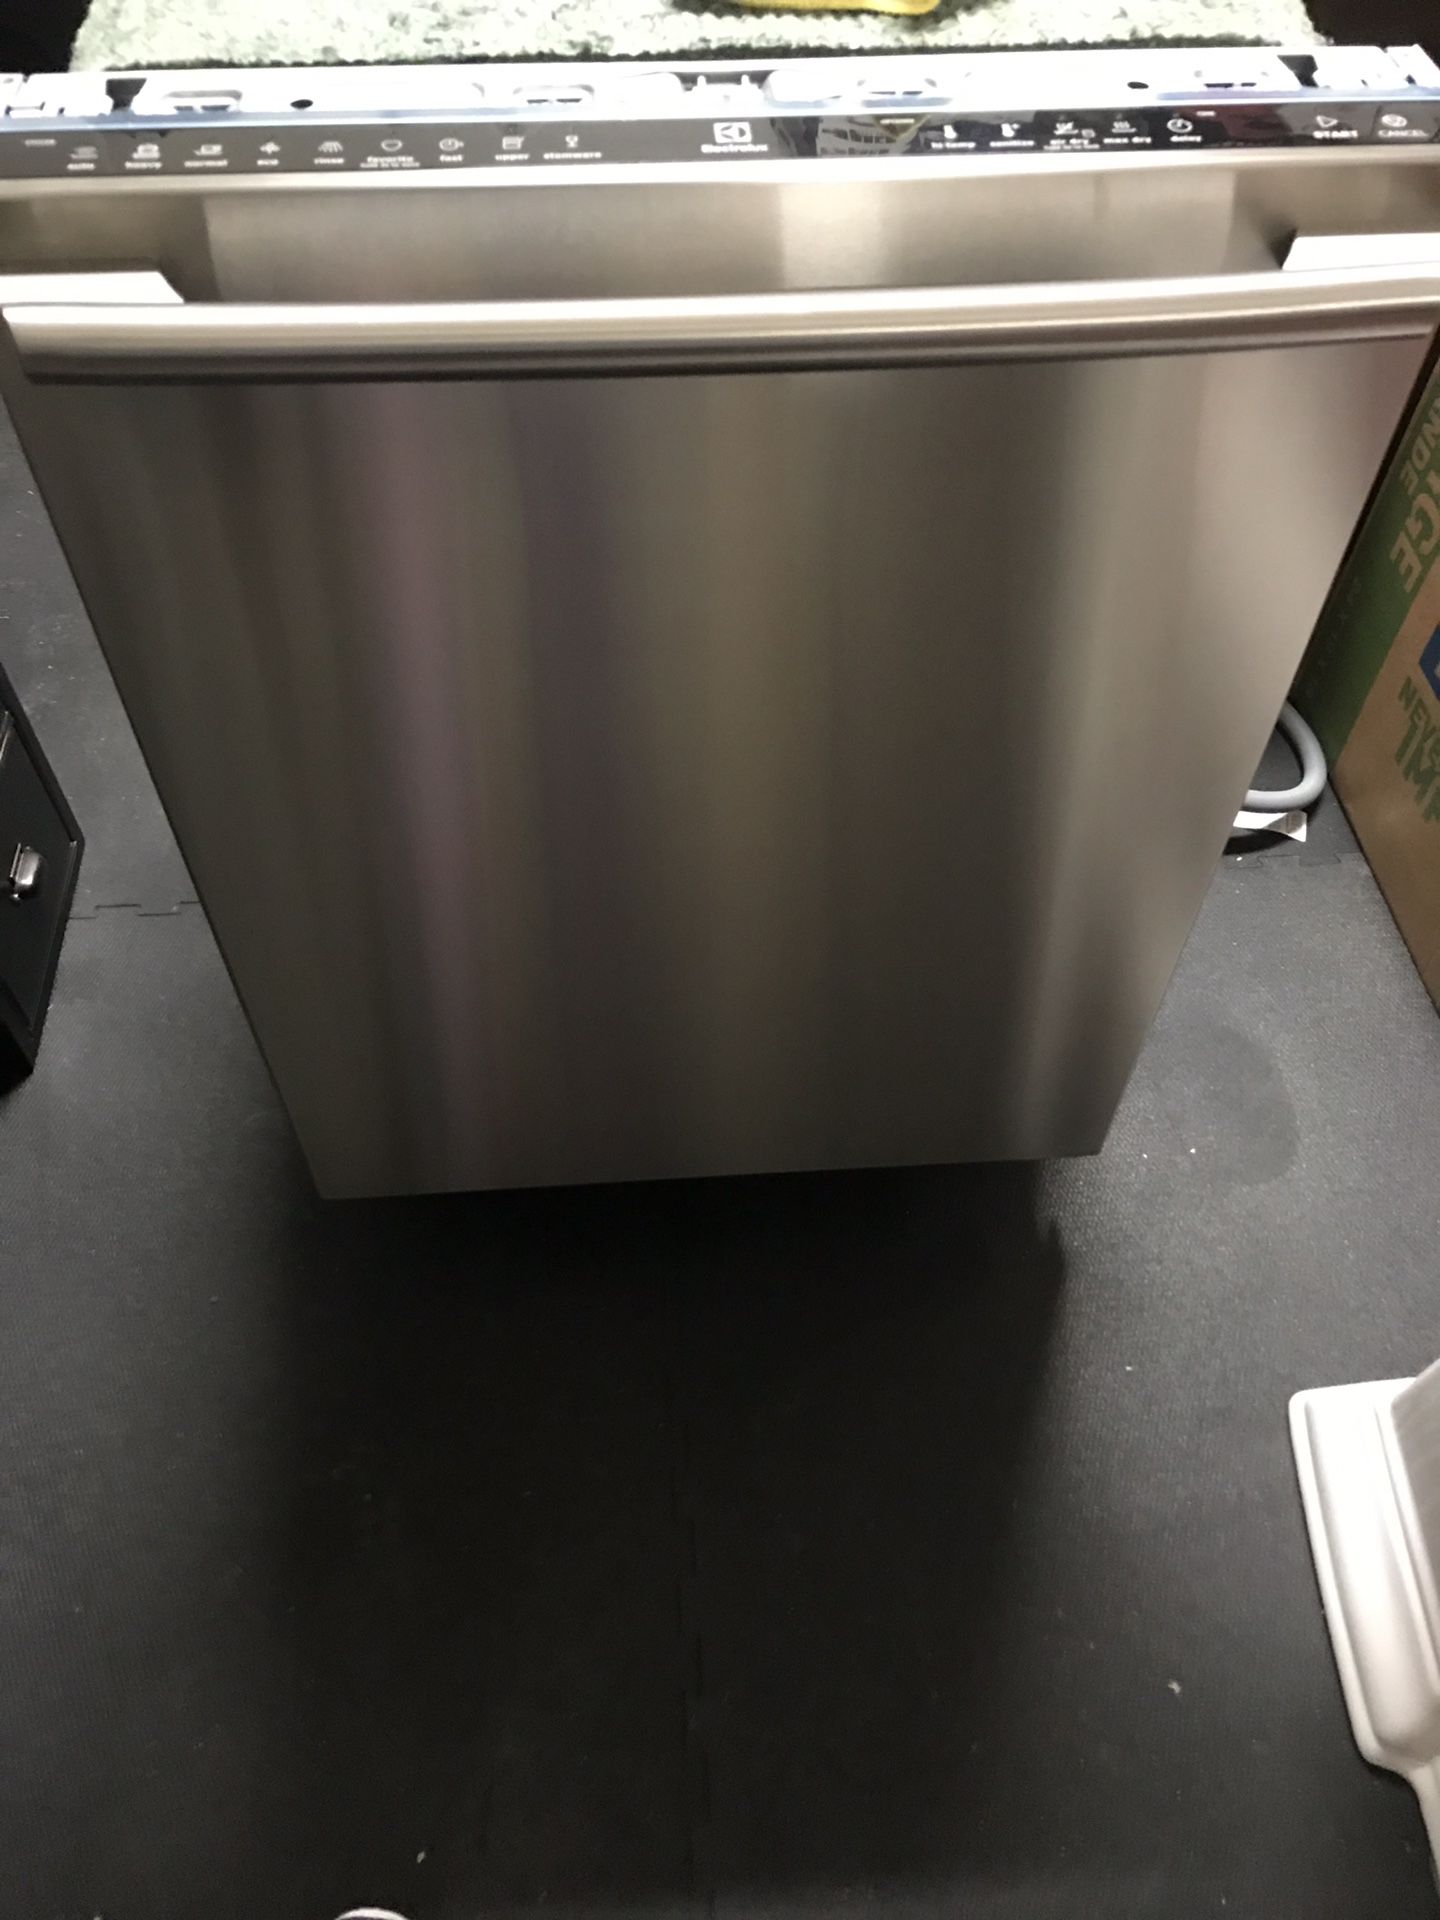 Brand New Electrolux Electrolux EI24ID81SS Stainless Steel Dishwasher 24 Inch Wide OBO! Make me a reasonable offer!